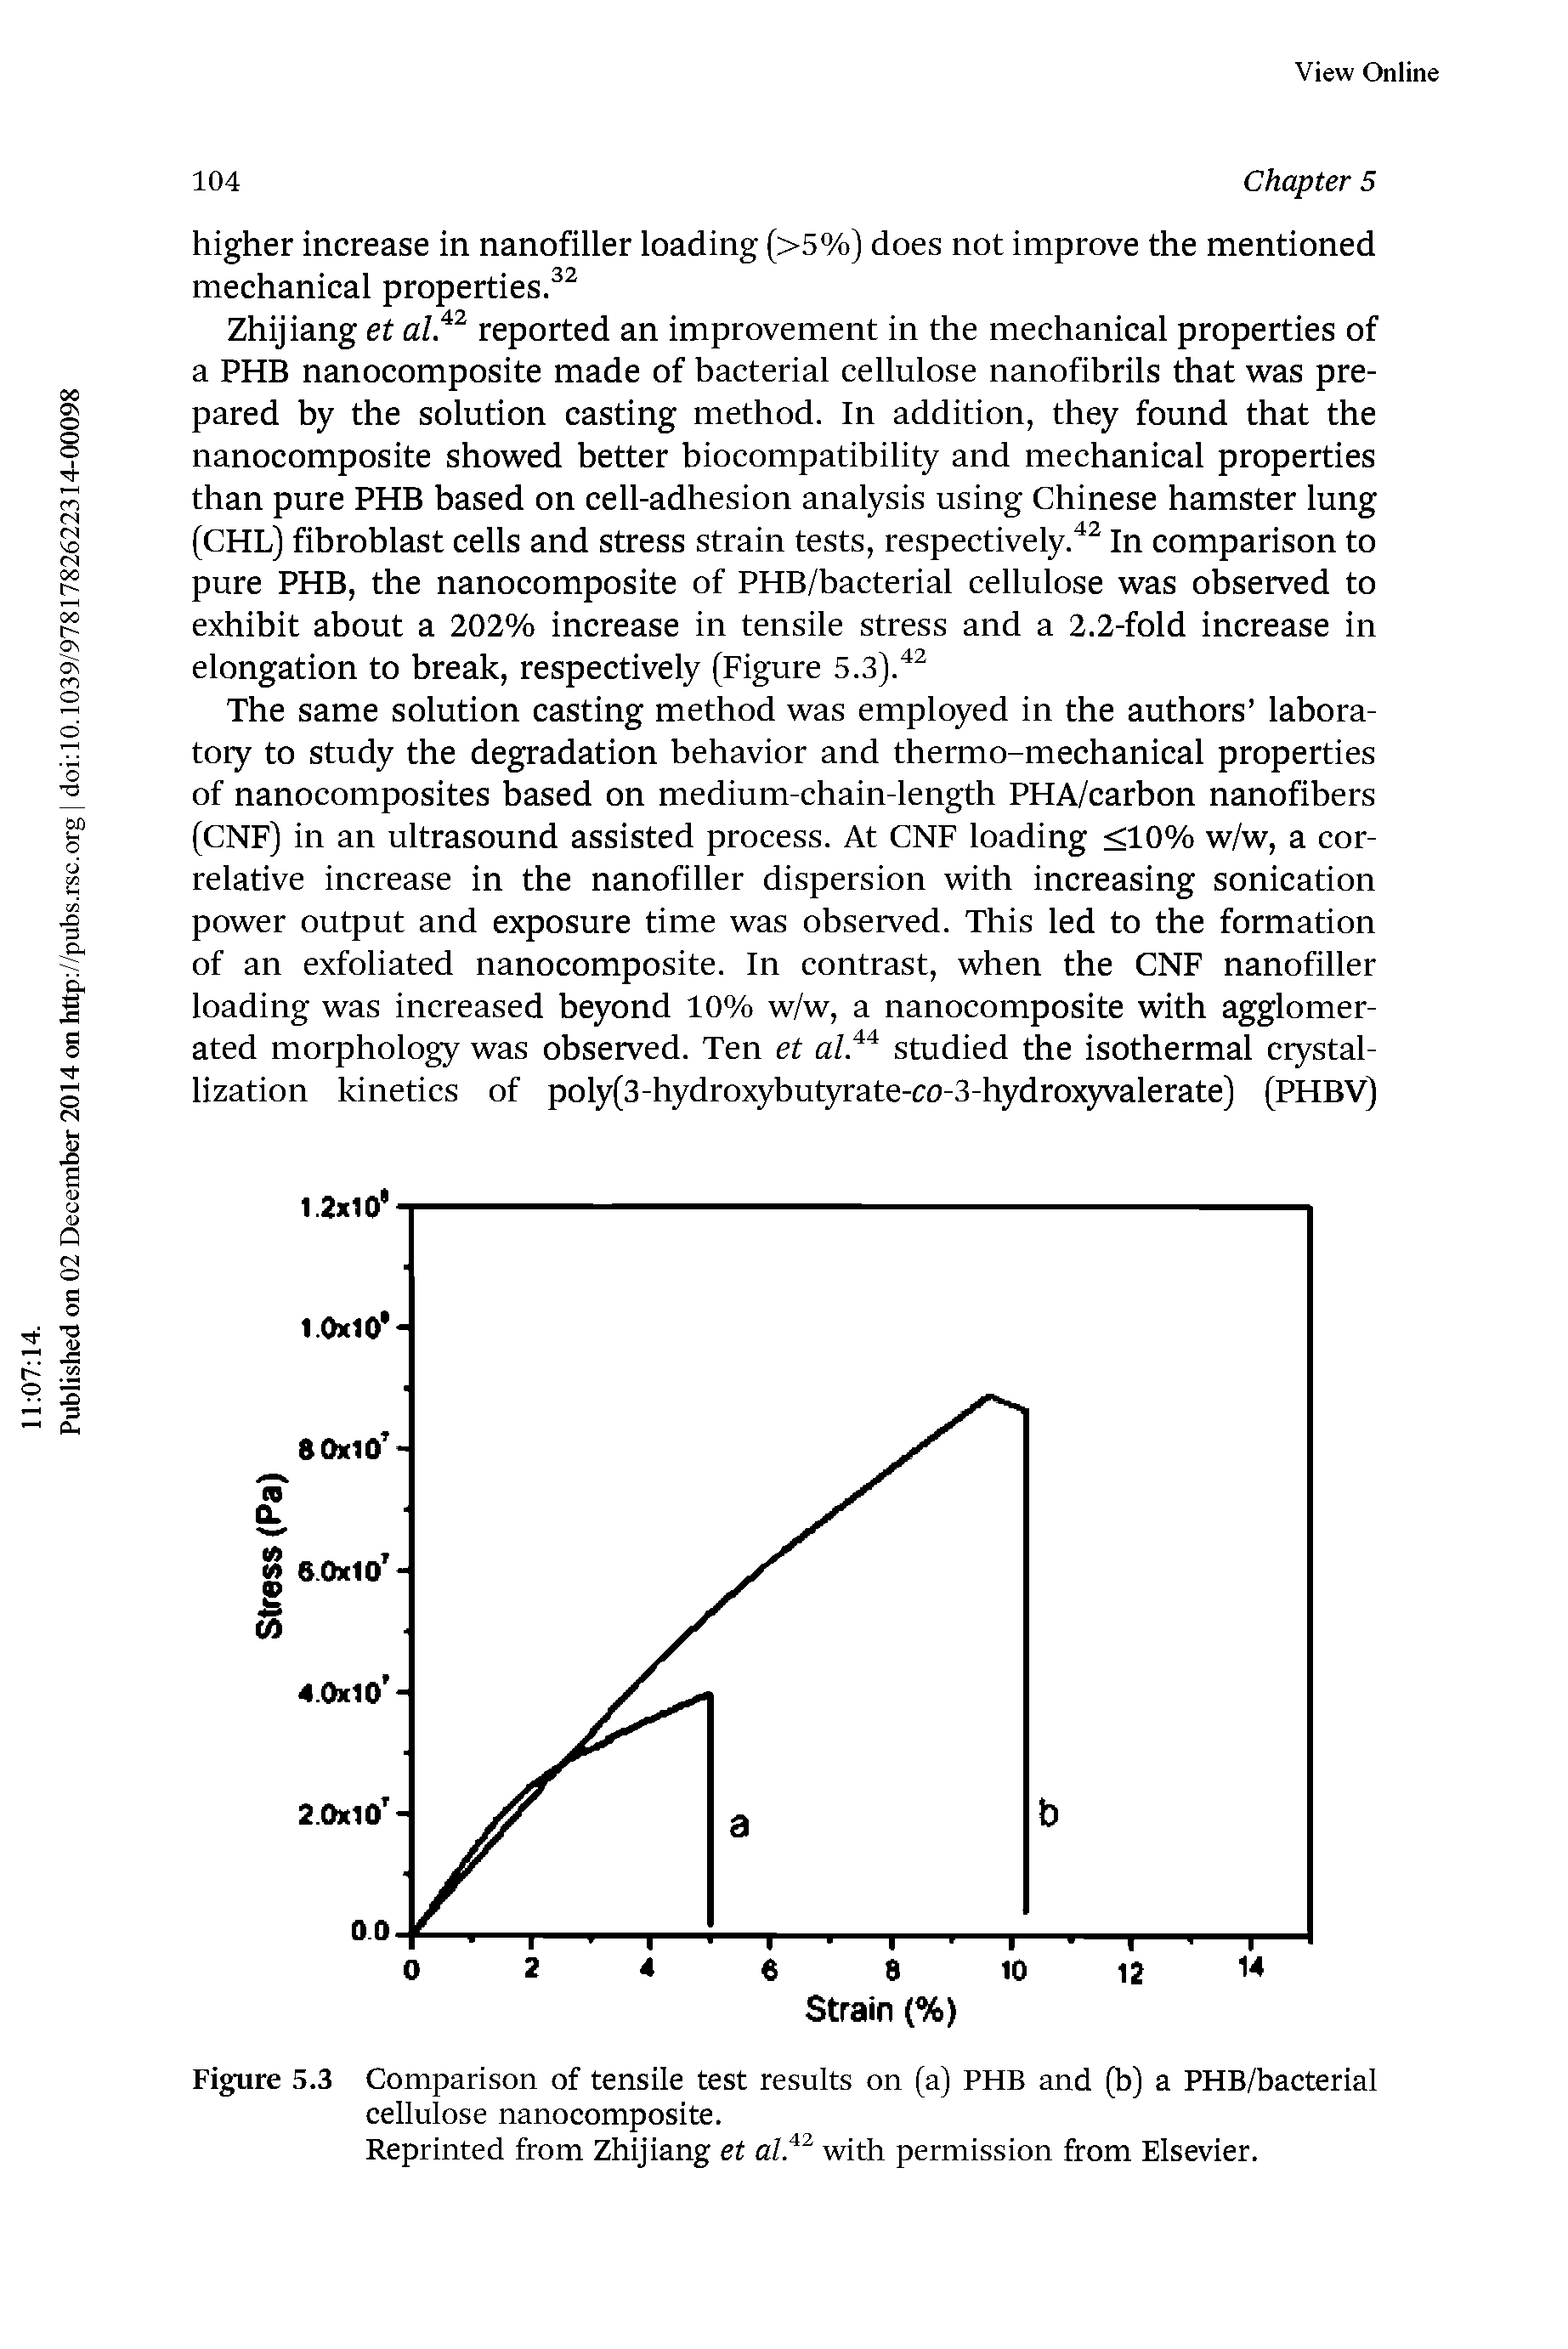 Figure 5.3 Comparison of tensile test results on (a) PHB and (b) a PHB/bacterial cellulose nanocomposite.